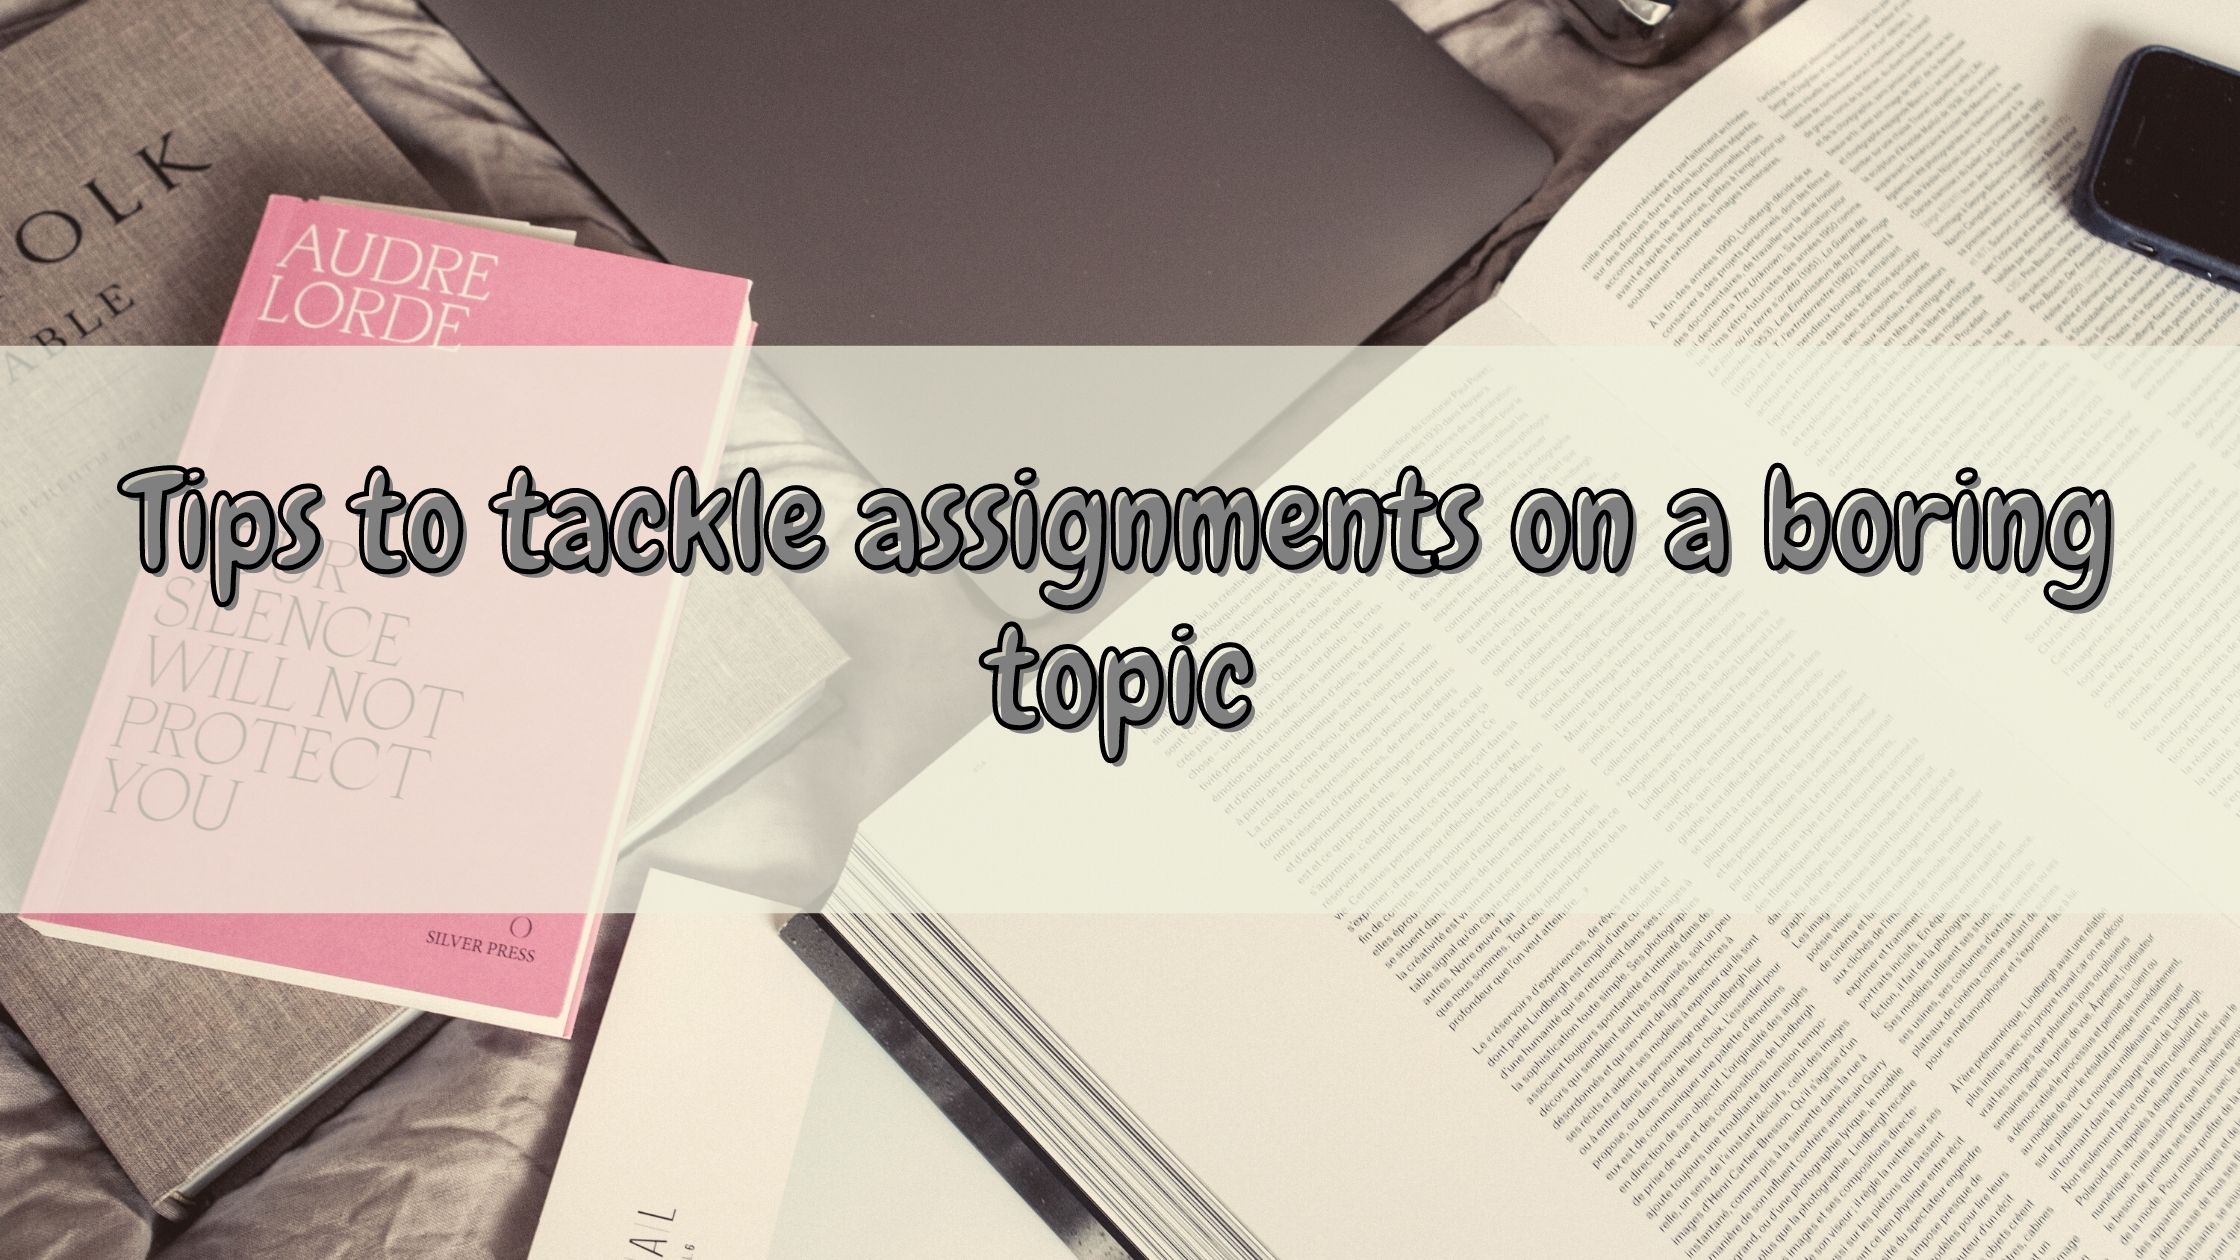 Tips to tackle assignments on a boring topic